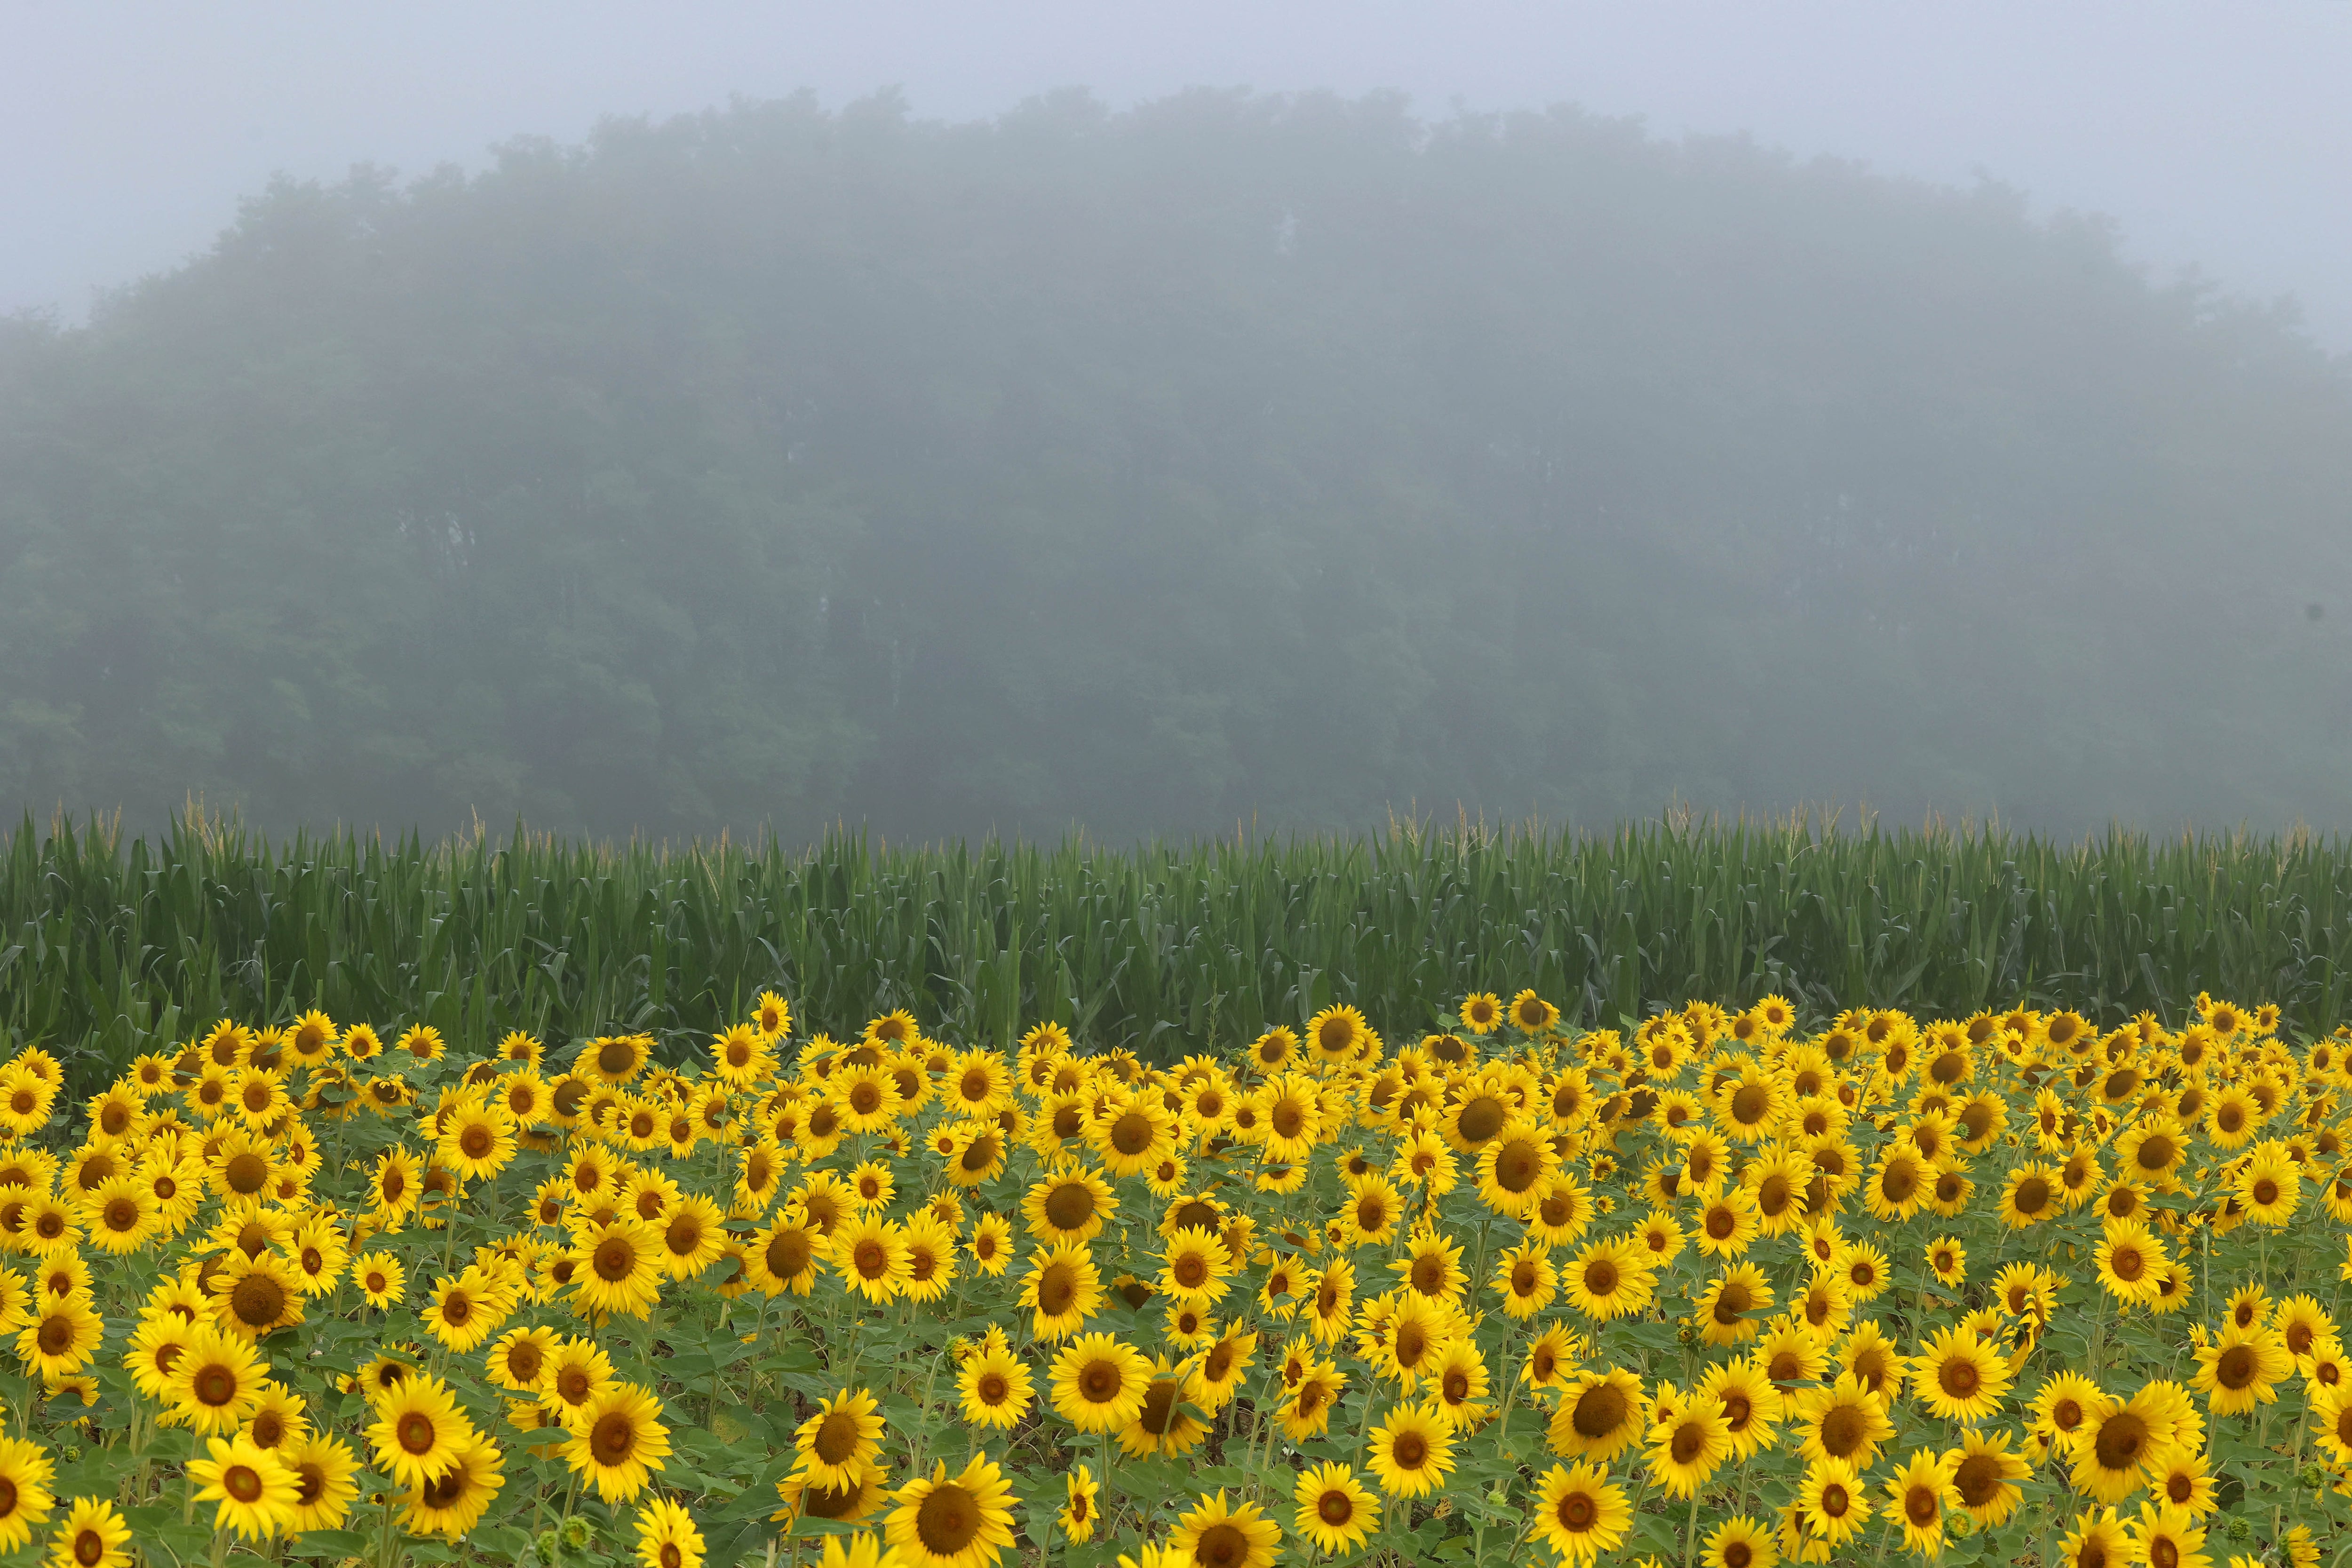 Photos: Sunflowers at Shabbona Lake State Recreation Area in full bloom